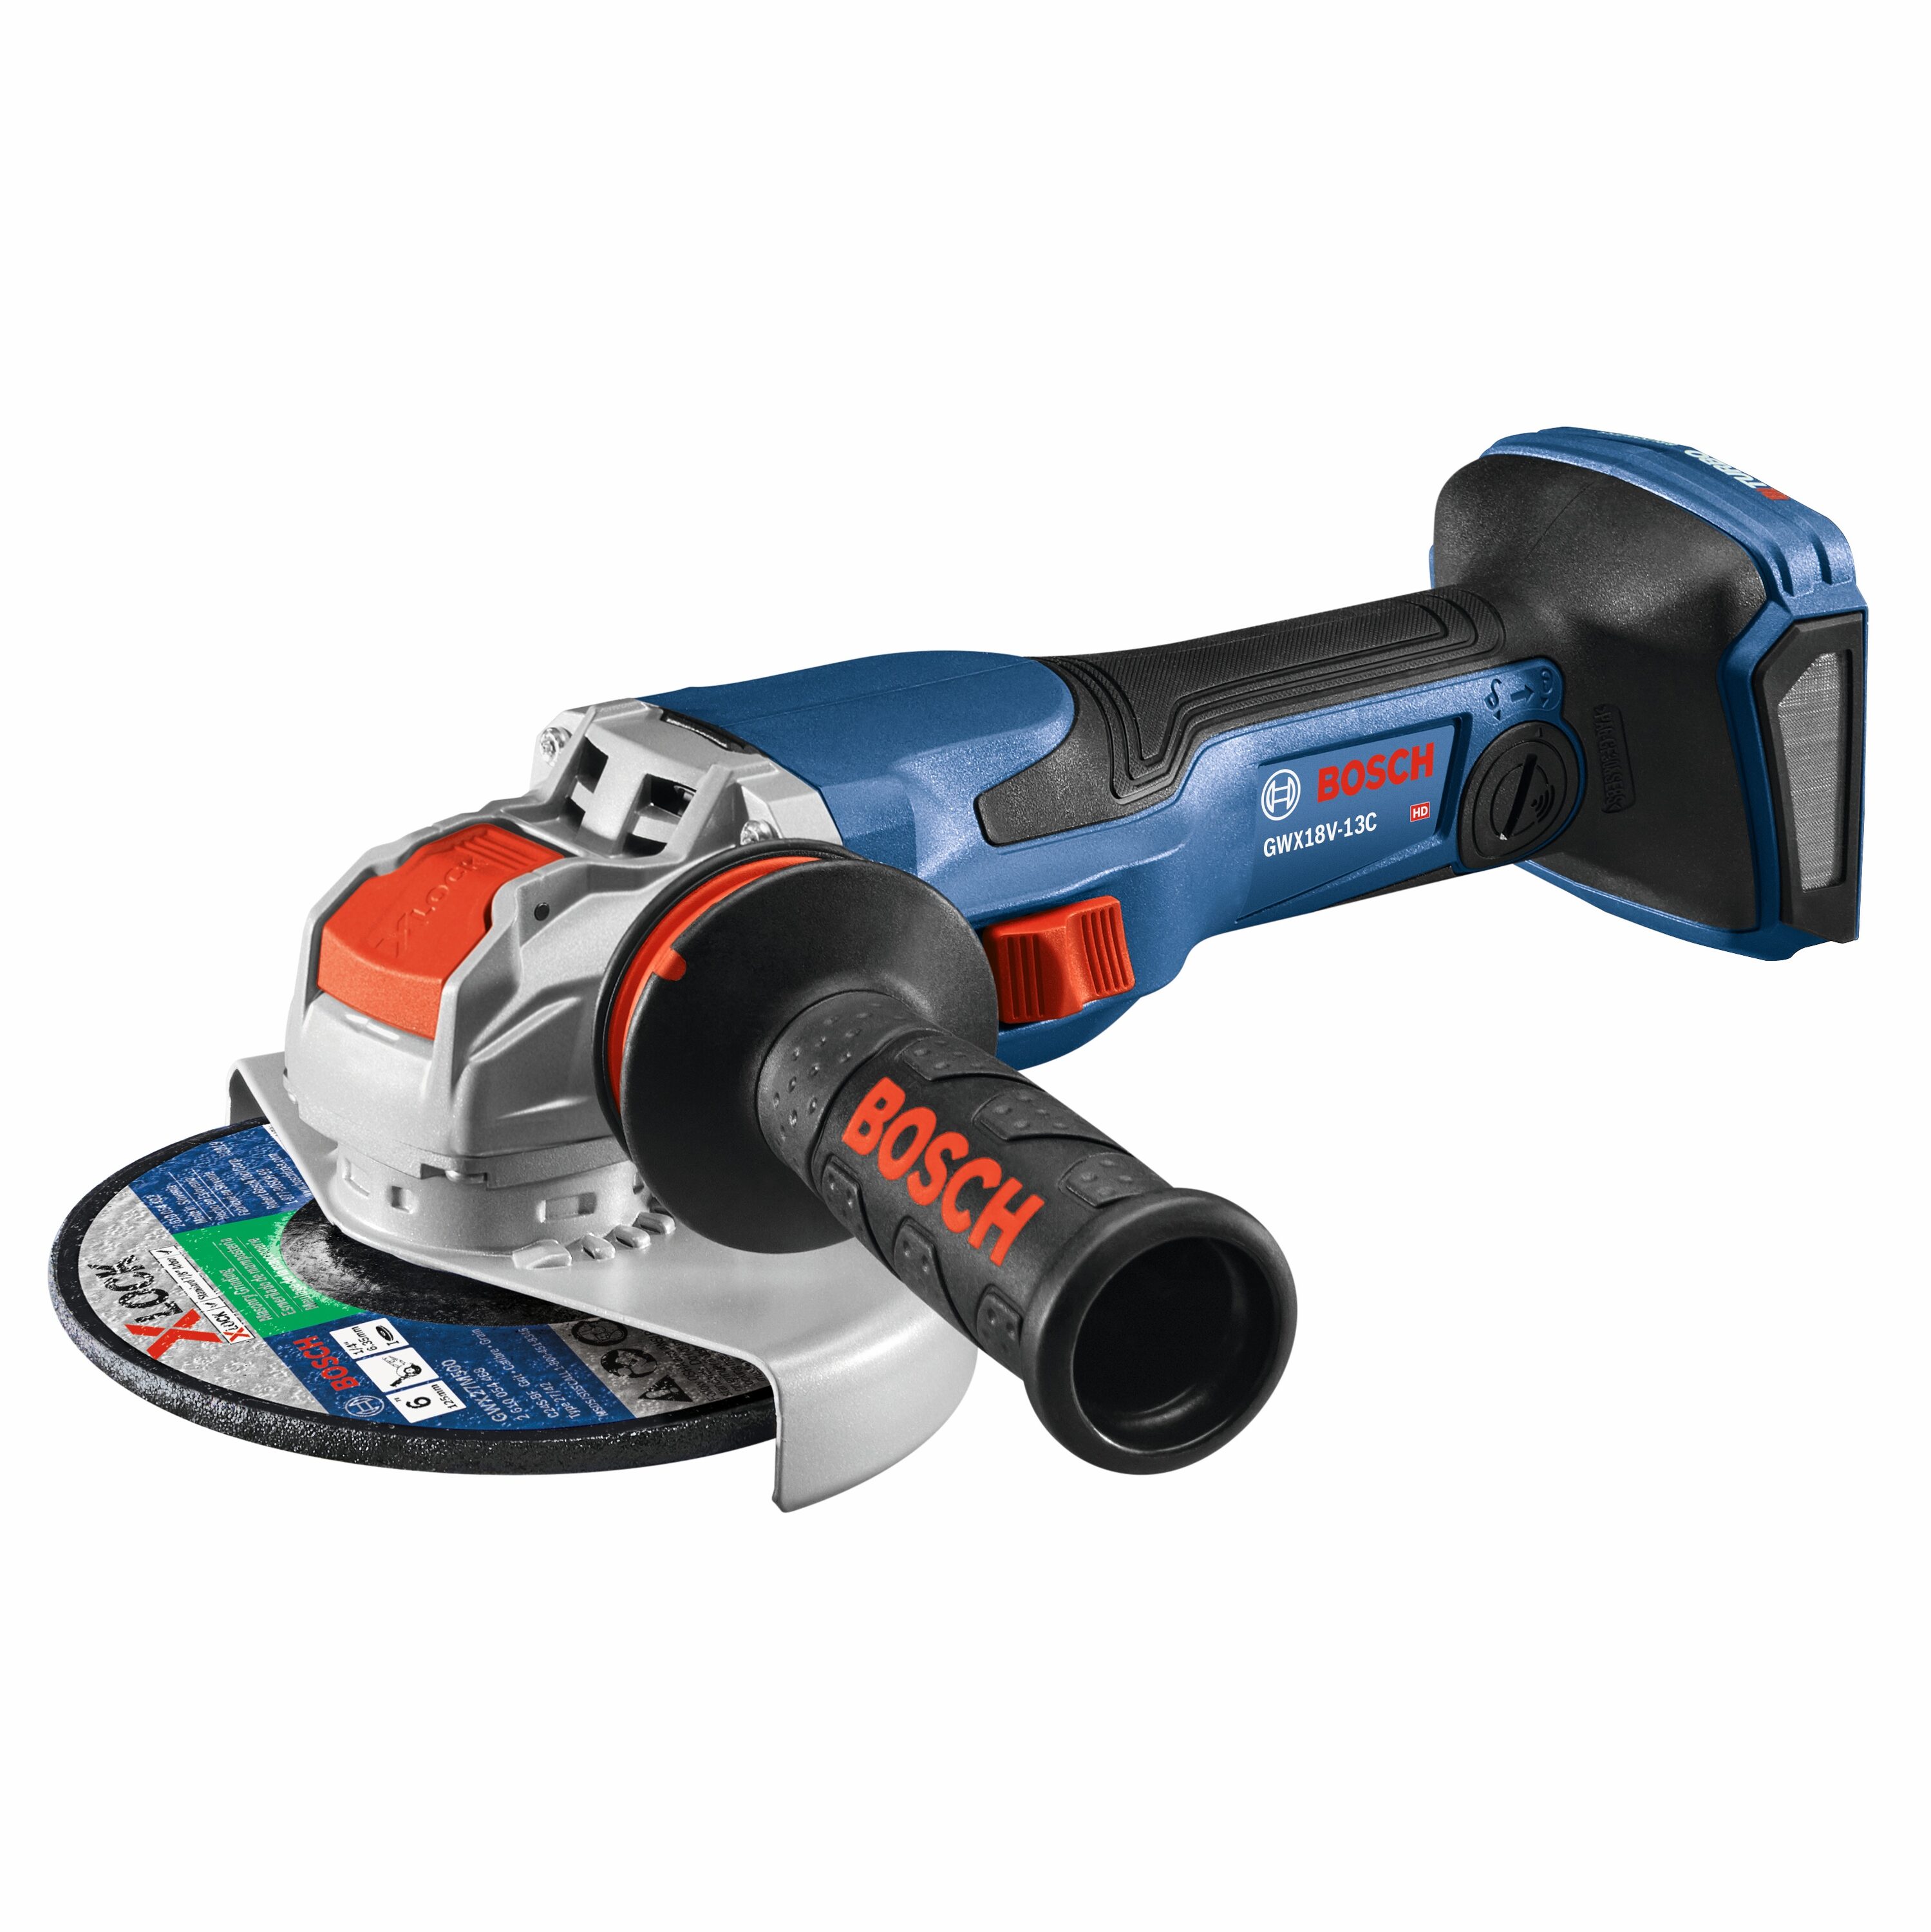 20v Cordless Angle Grinder & Cut-Off Tool 4.5/5 with E-Brake (Bare Tool)